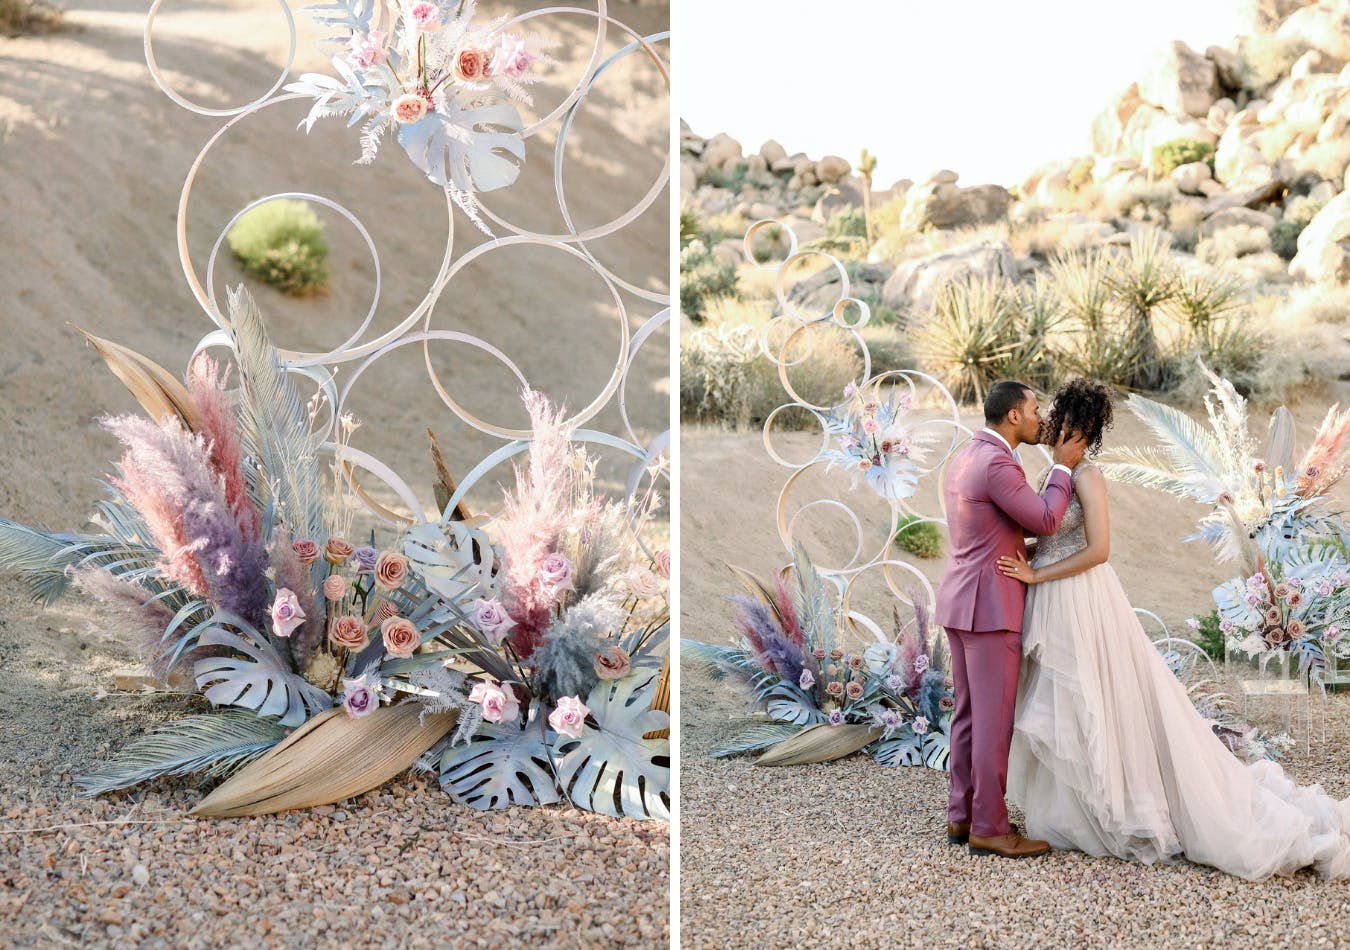 Desert micro wedding with bubble-like white wedding ceremony backdrop and pastel-dyed pampas grass | PartySlate